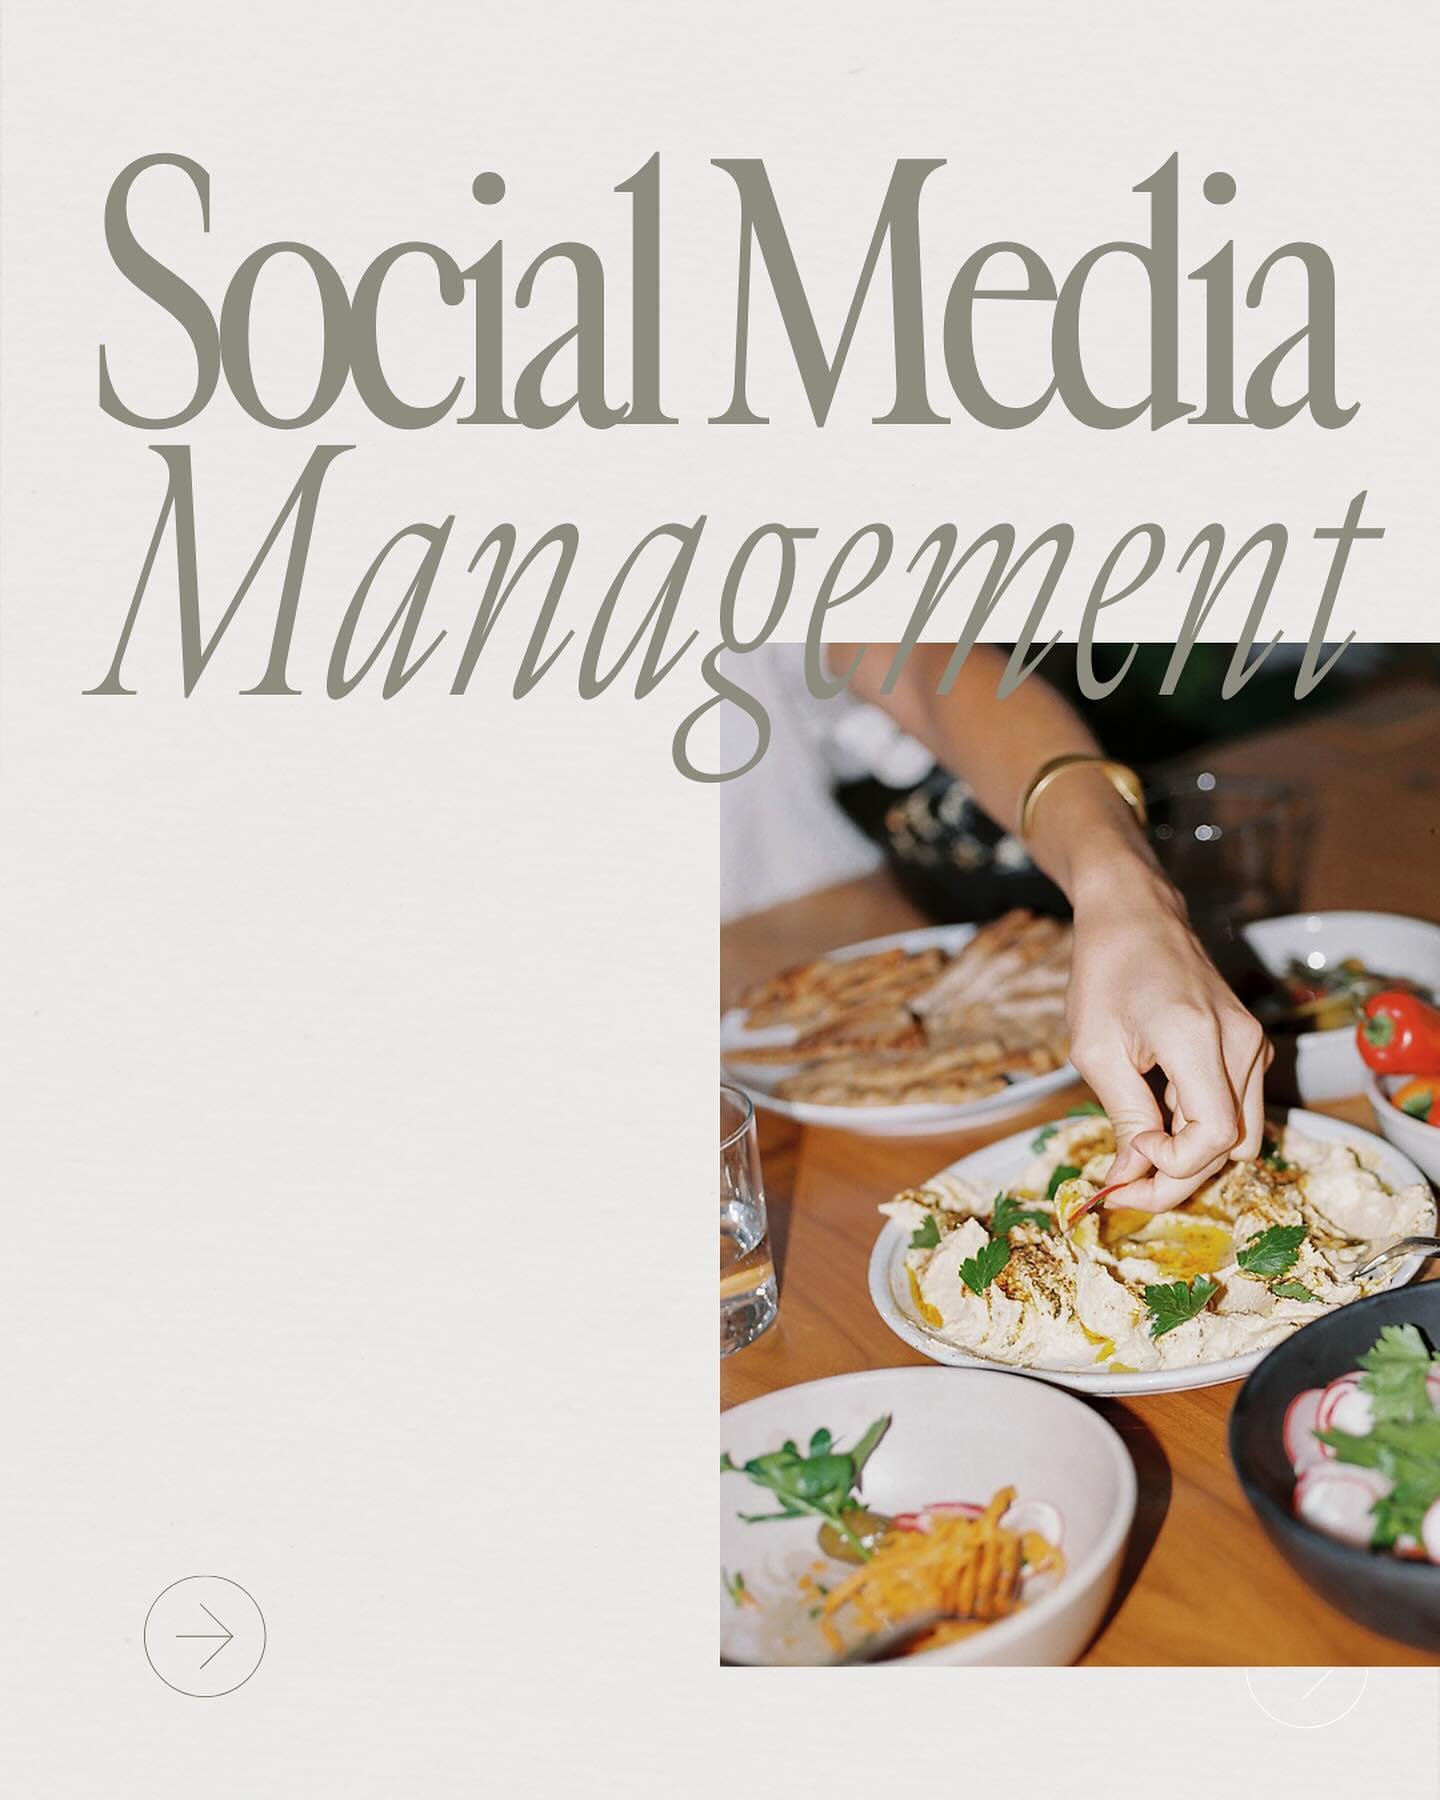 The offering that started it all. Social Media Management is a holistic and whole partnership where we shop up and sit at the same table to reimagine and redefine what your marketing can be. 

You can finally exhale knowing you have a full-service te